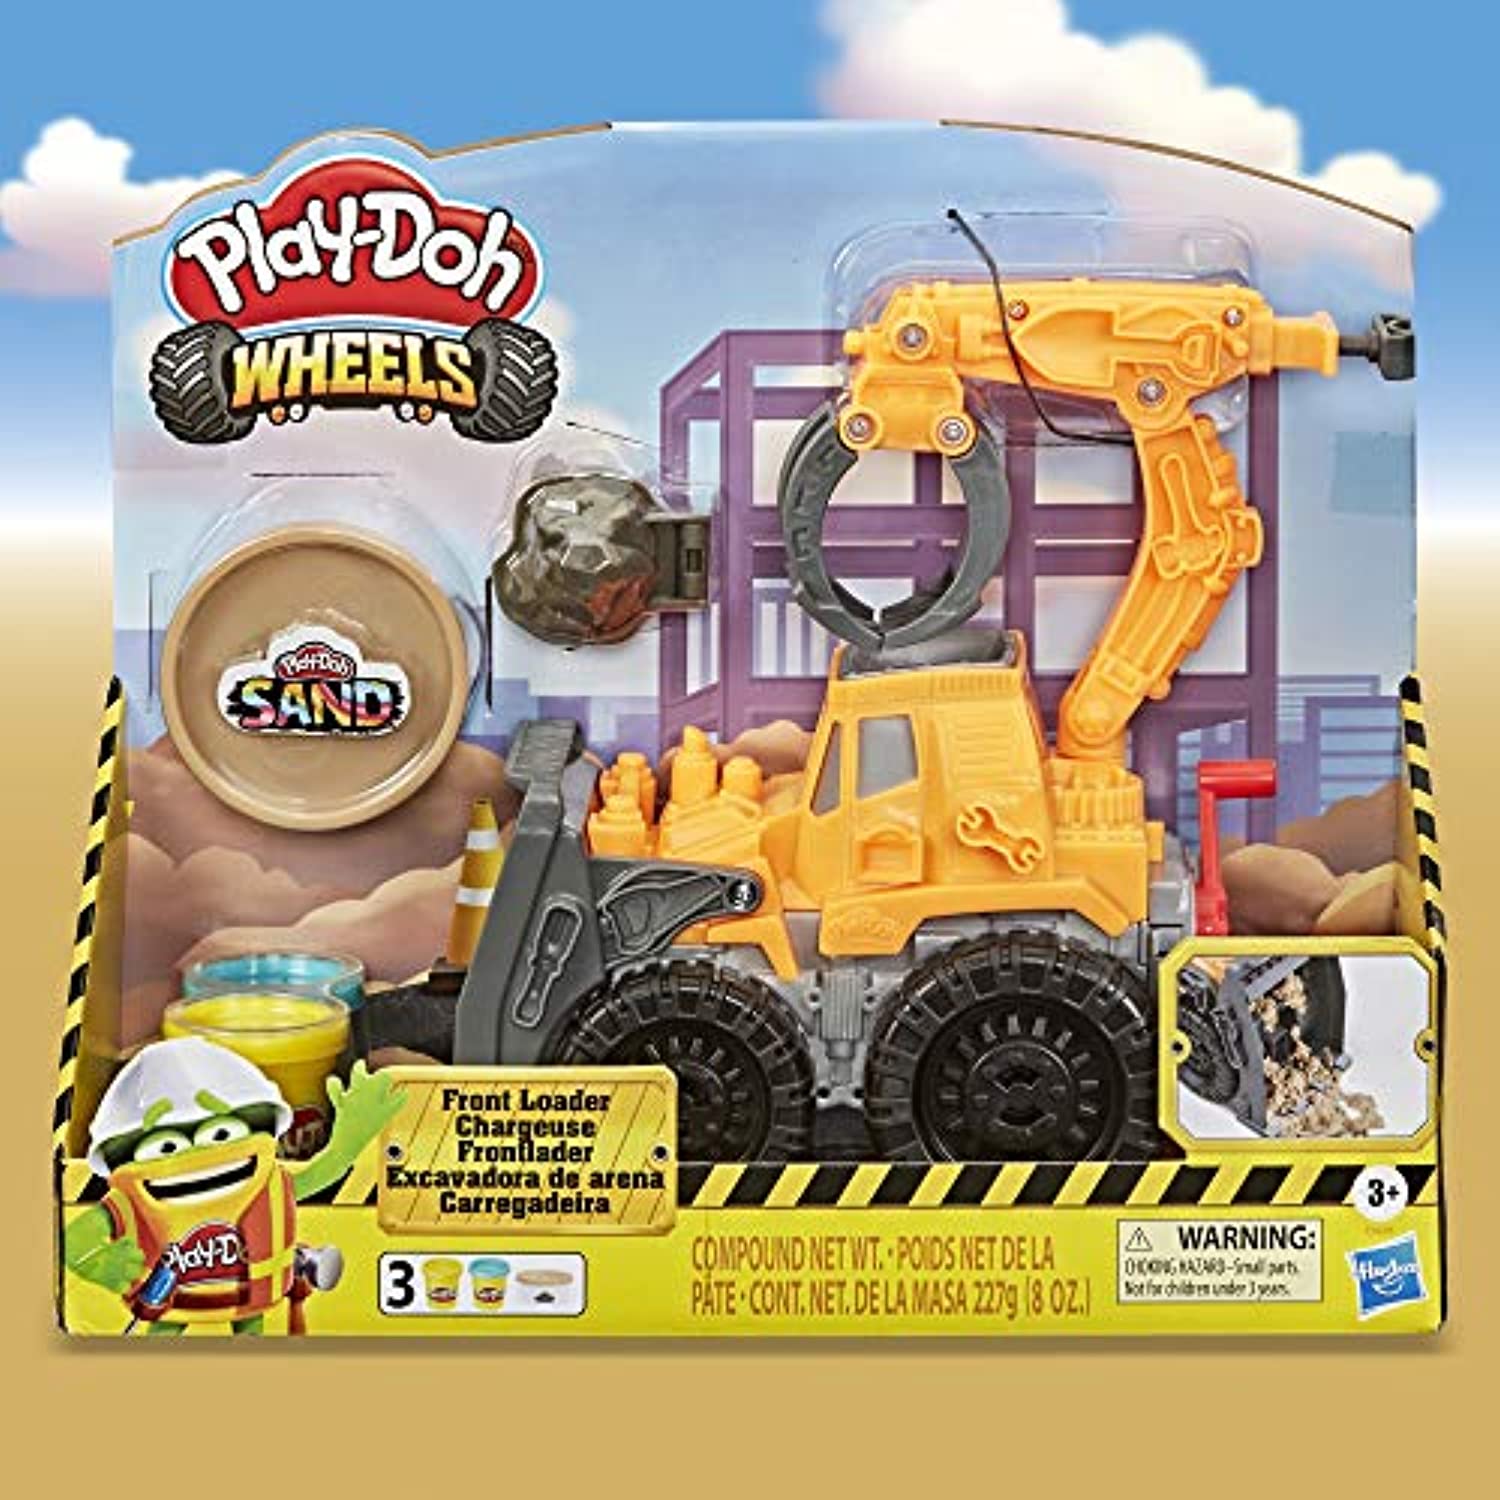 Play-Doh Wheels Front Loader Construction Set Toys - image 4 of 9